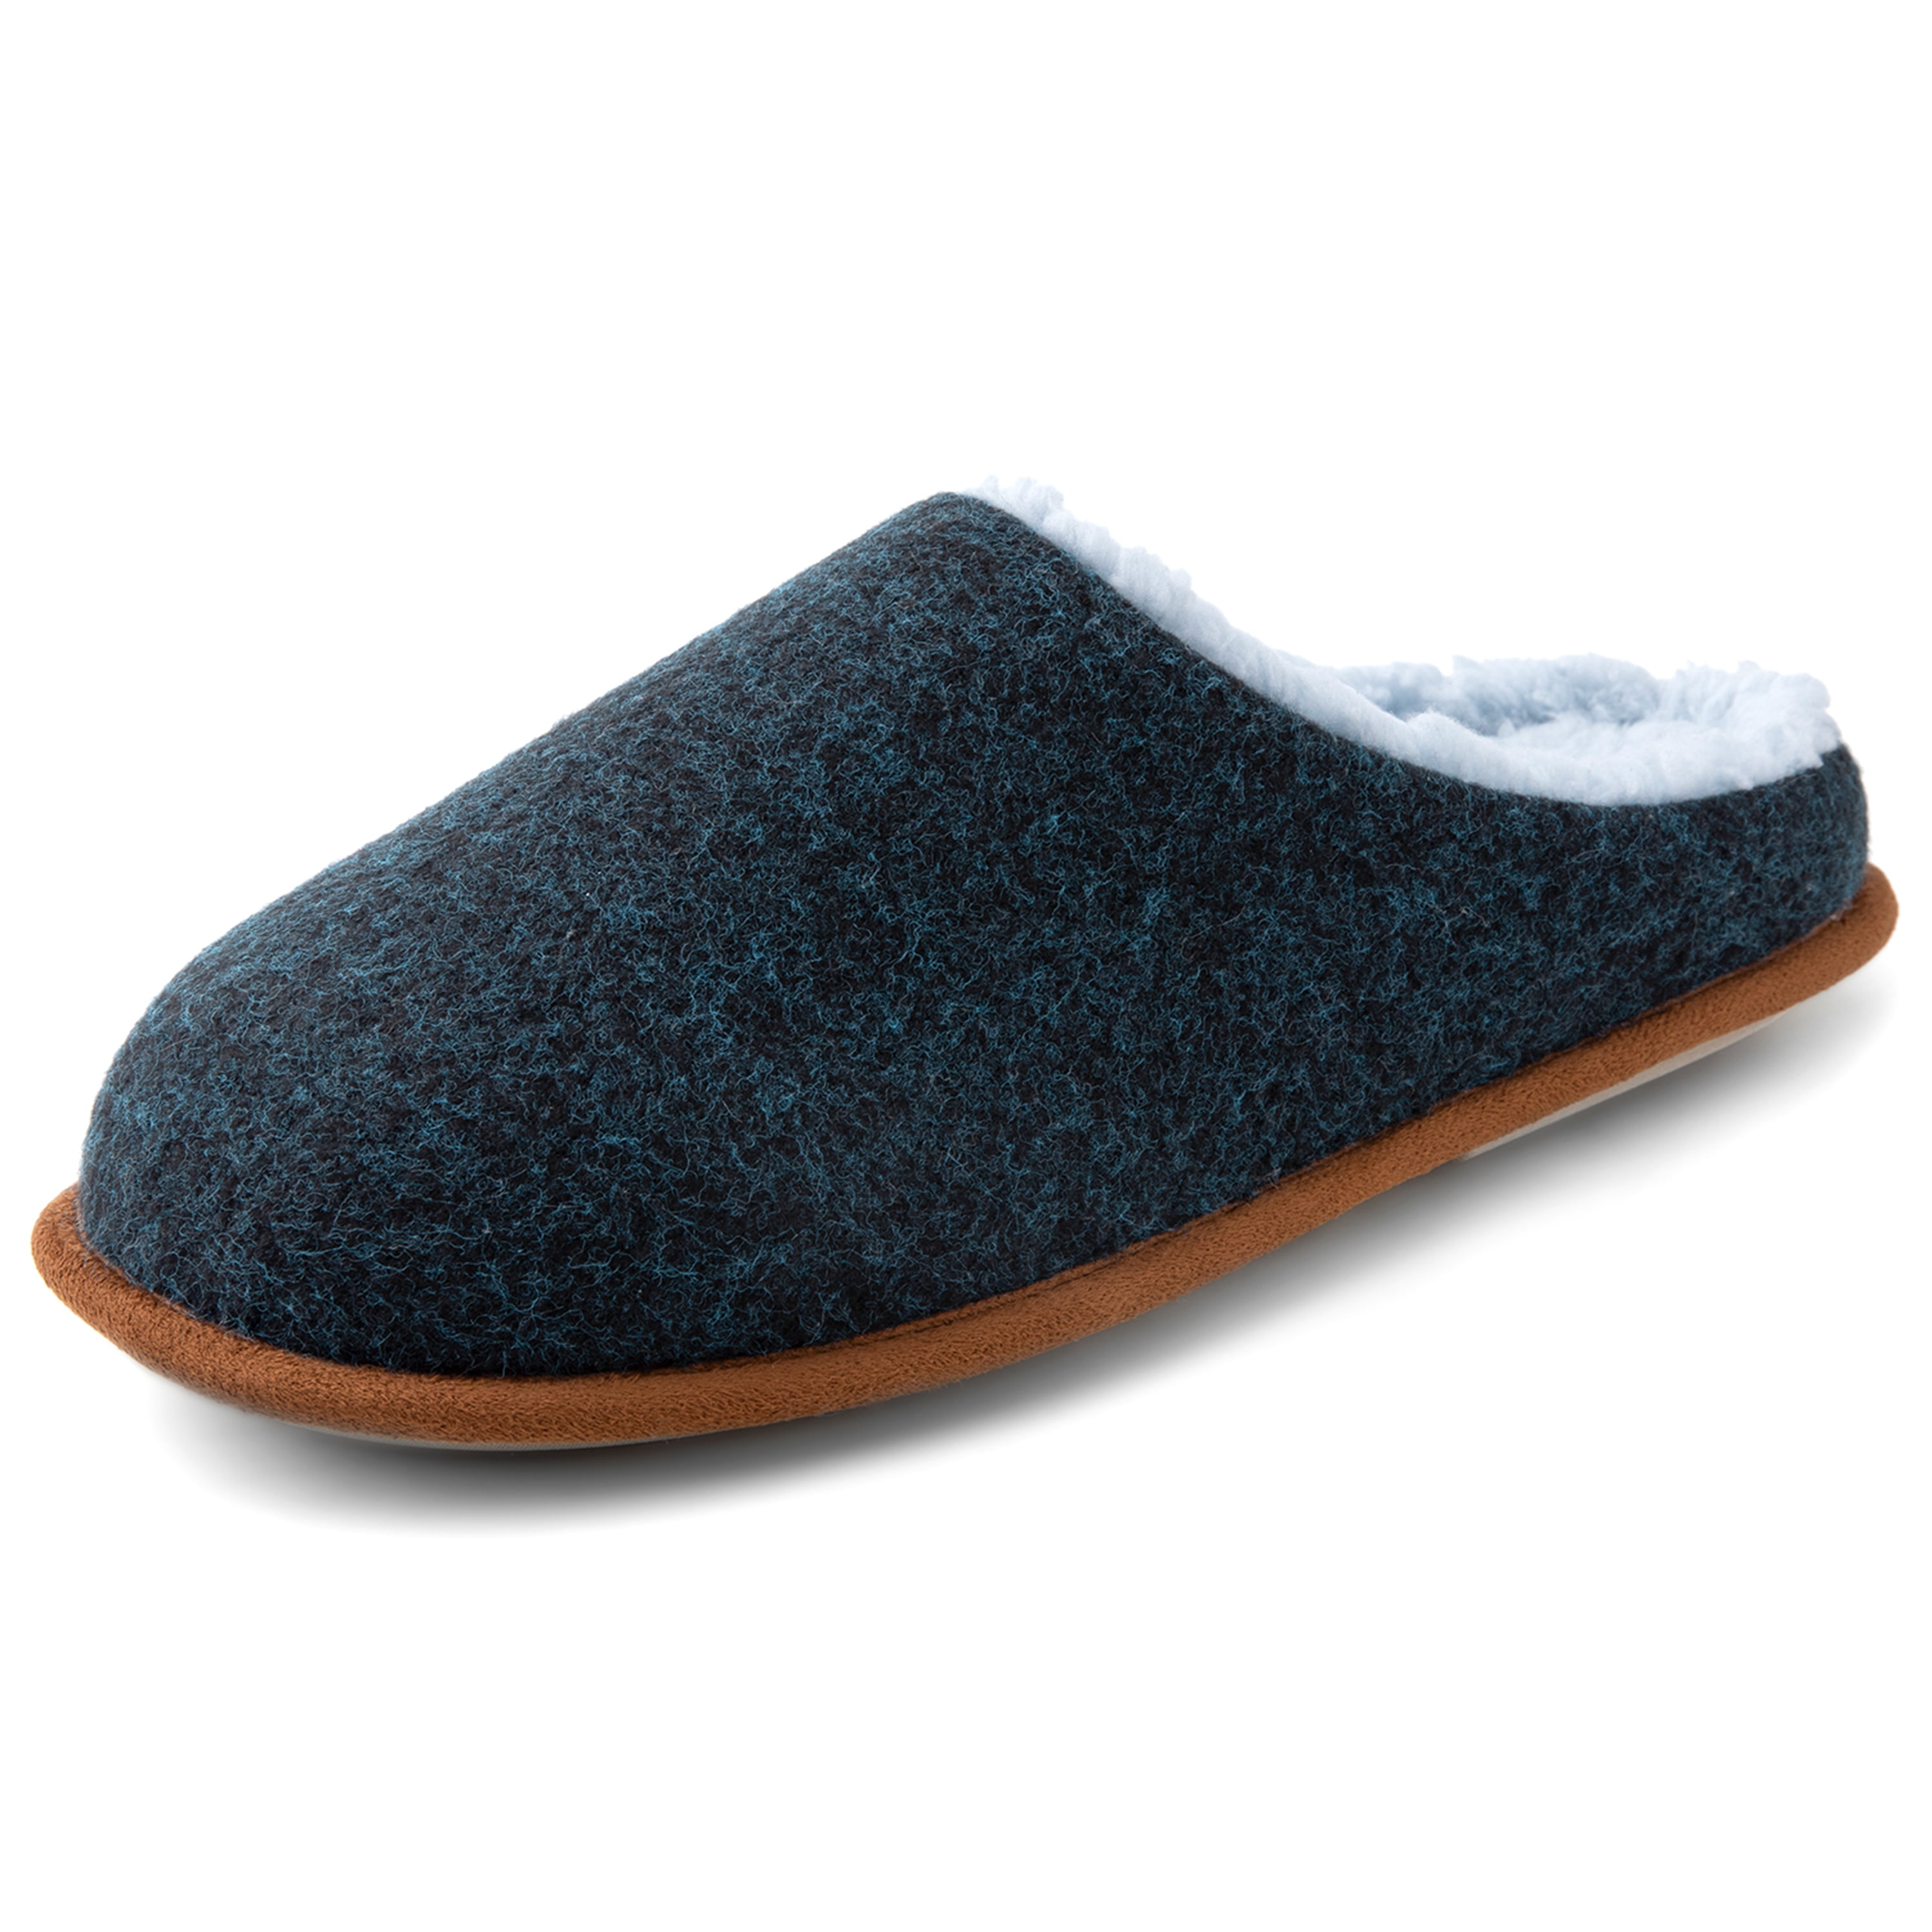 Mens Slip On Comfy Slippers with Fur Lined, Memory House Shoes with Felt Upper Machine Washable - Walmart.com